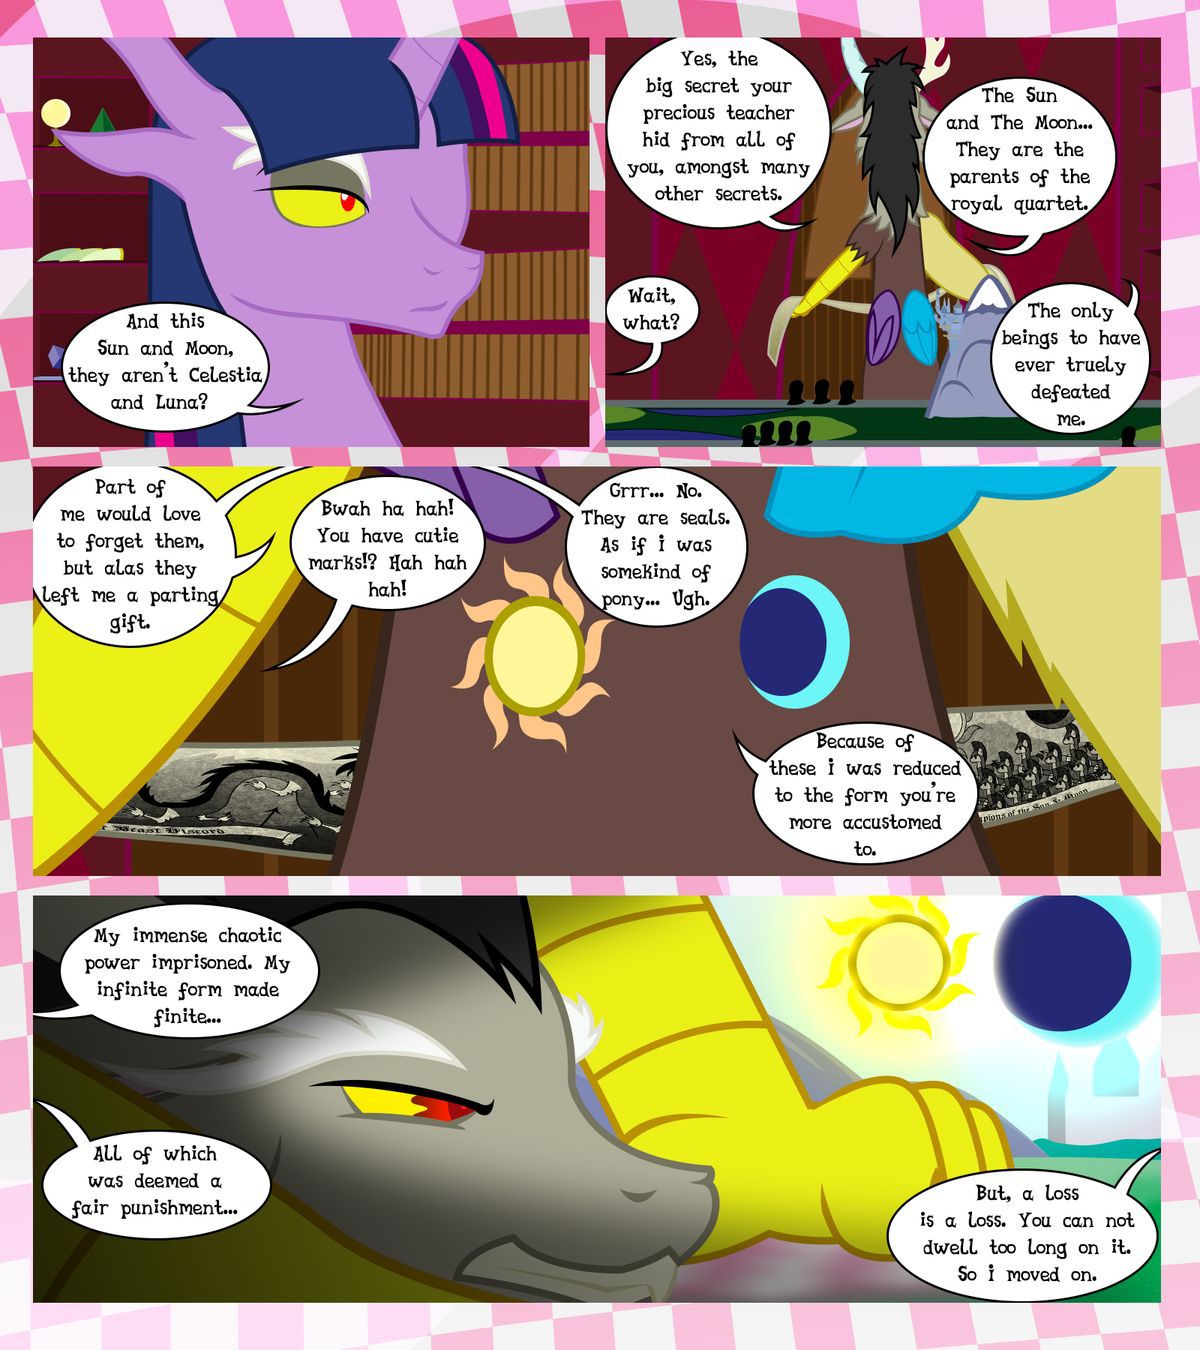 [GatesMcCloud] Cutie Mark Crusaders 10k: Chapter 3 - The Lost (My Little Pony: Friendship is Magic) [English] [Ongoing] 29